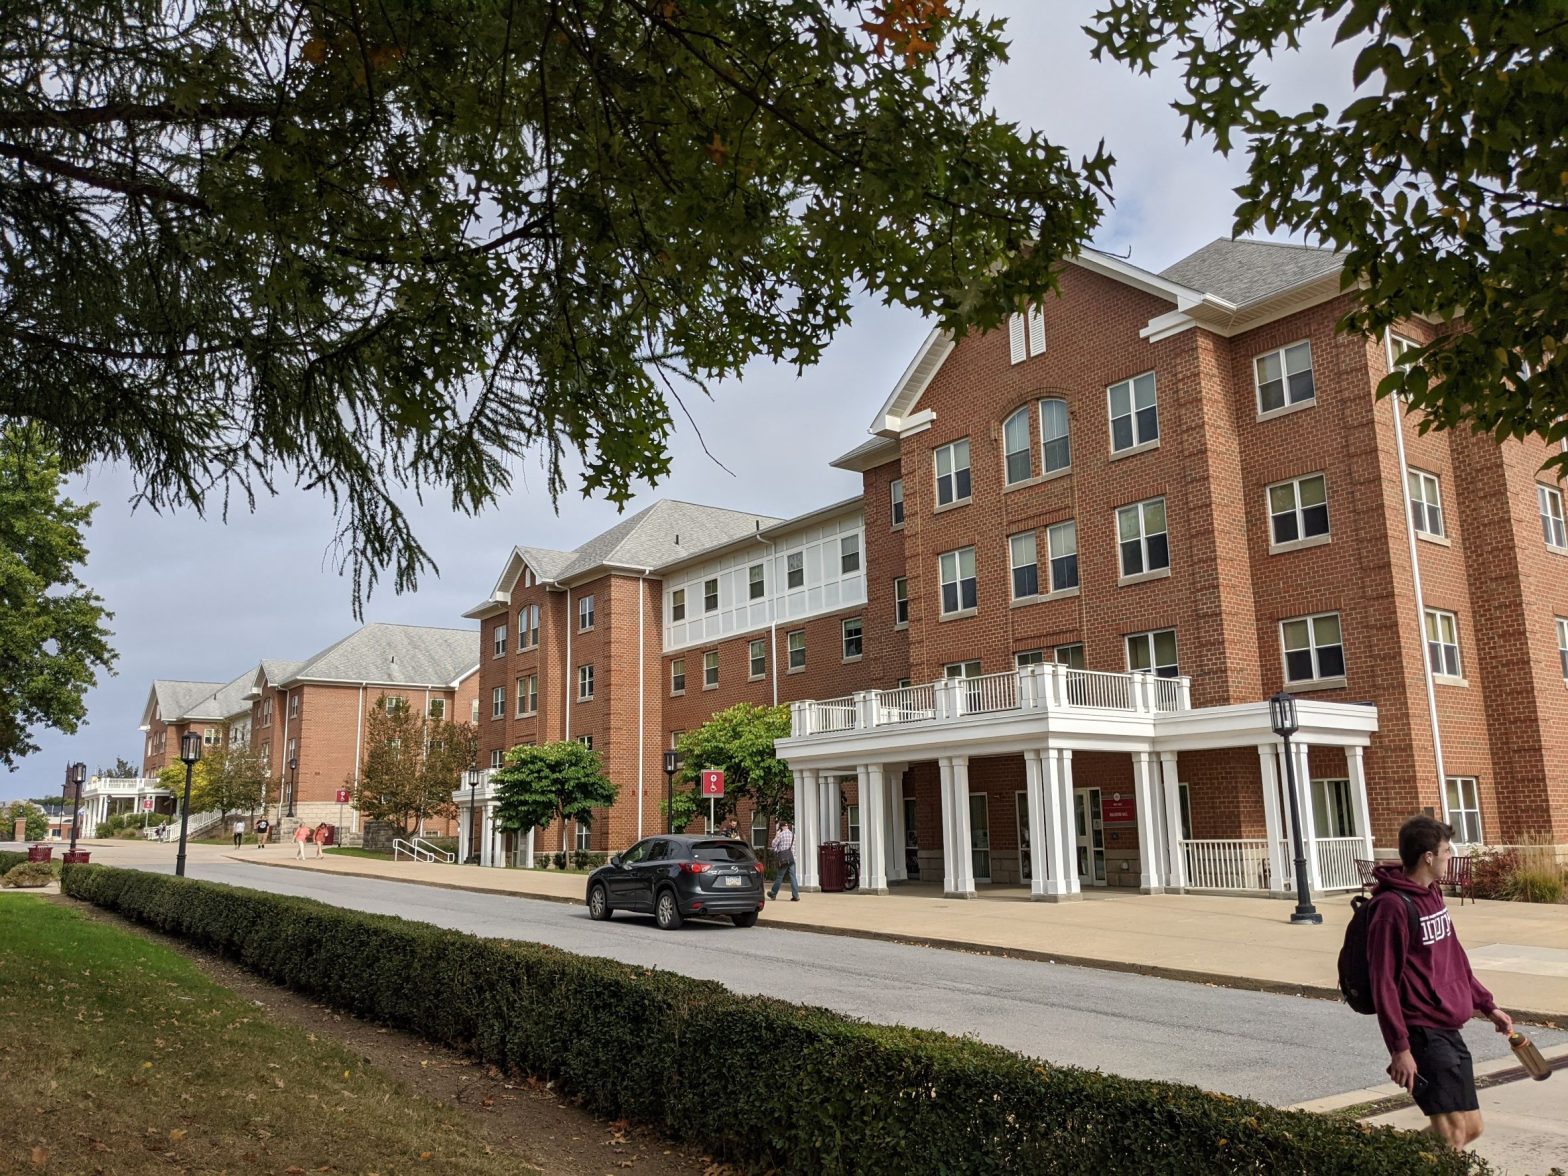 Historical looking pink brick residence hall with many gabled roofs, white front porch and trim, truncated dormer windows and brick quoining, very classical looking building (designed in style of Sutton Hall, the old campus Main)